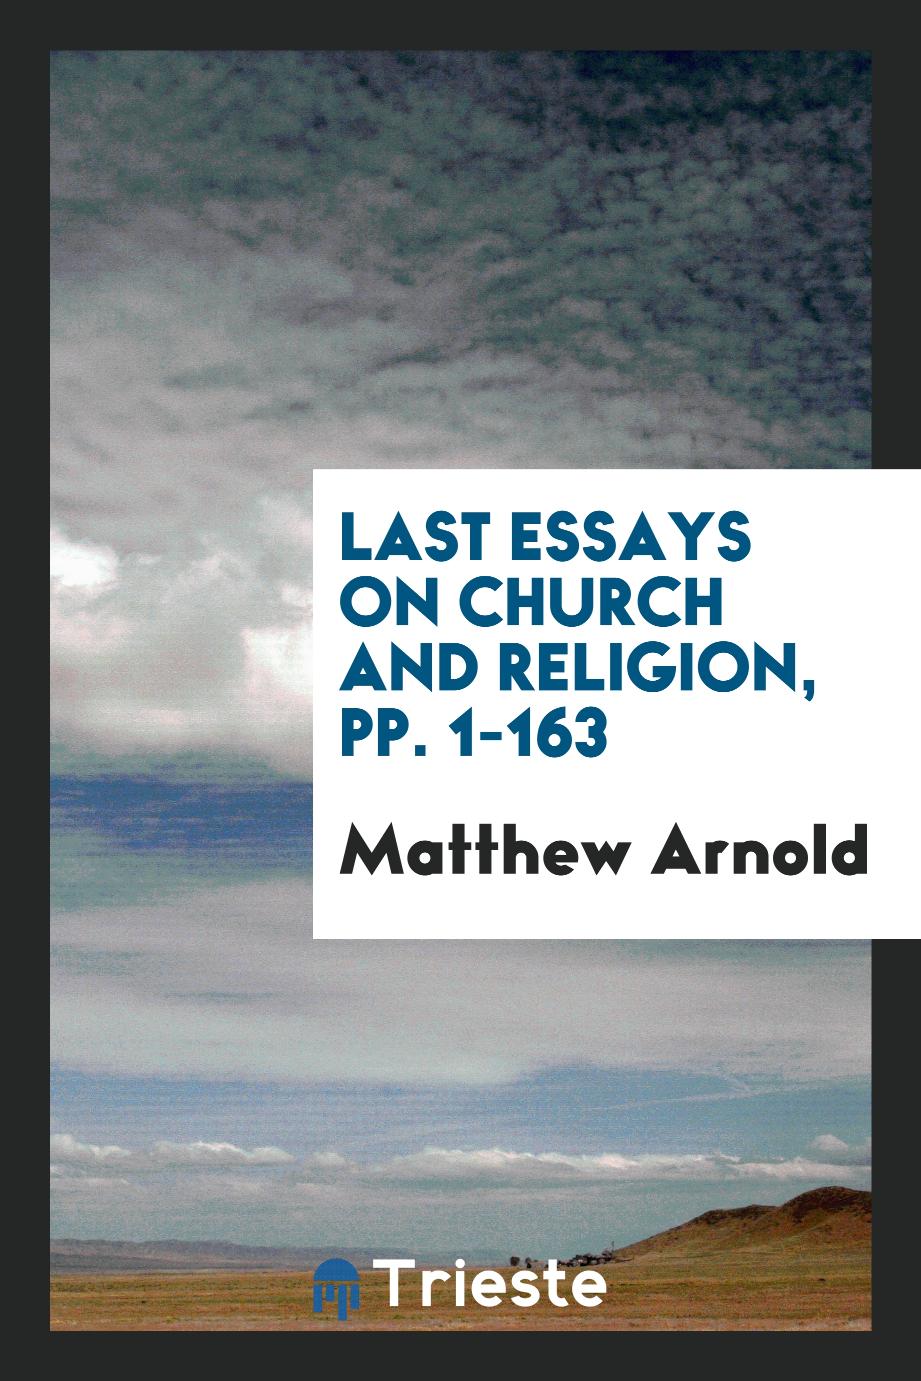 Last Essays on Church and Religion, pp. 1-163